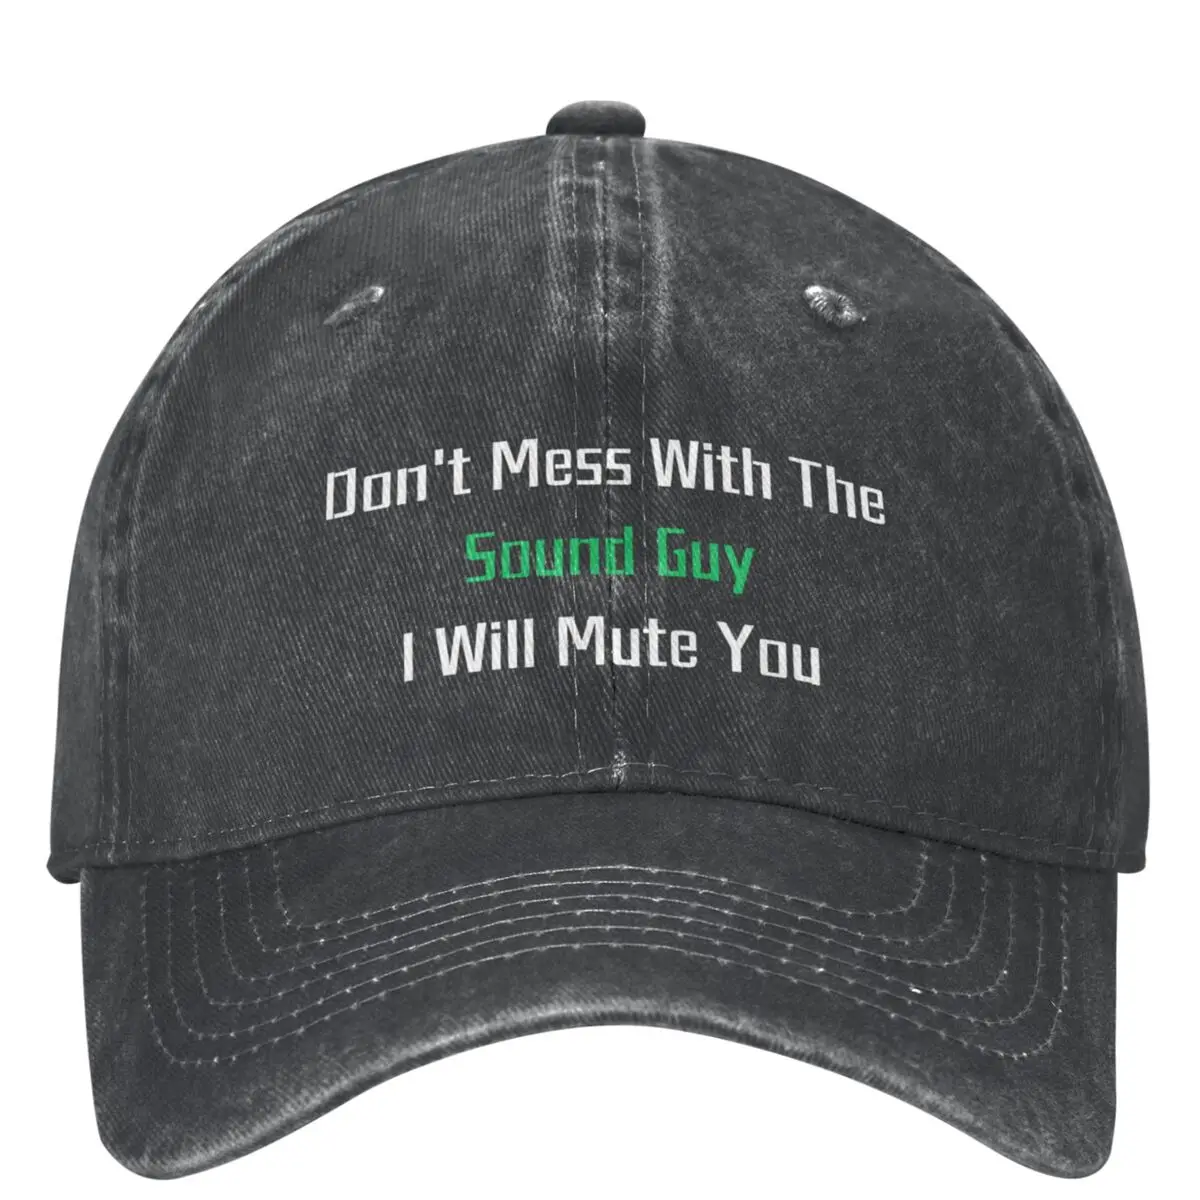 

Don't Mess With The Sound Guy Denim Baseball Cap Audio Engineer Gift Outdoor Hip Hop Hats Summer Couple y2k Retro Baseball Caps